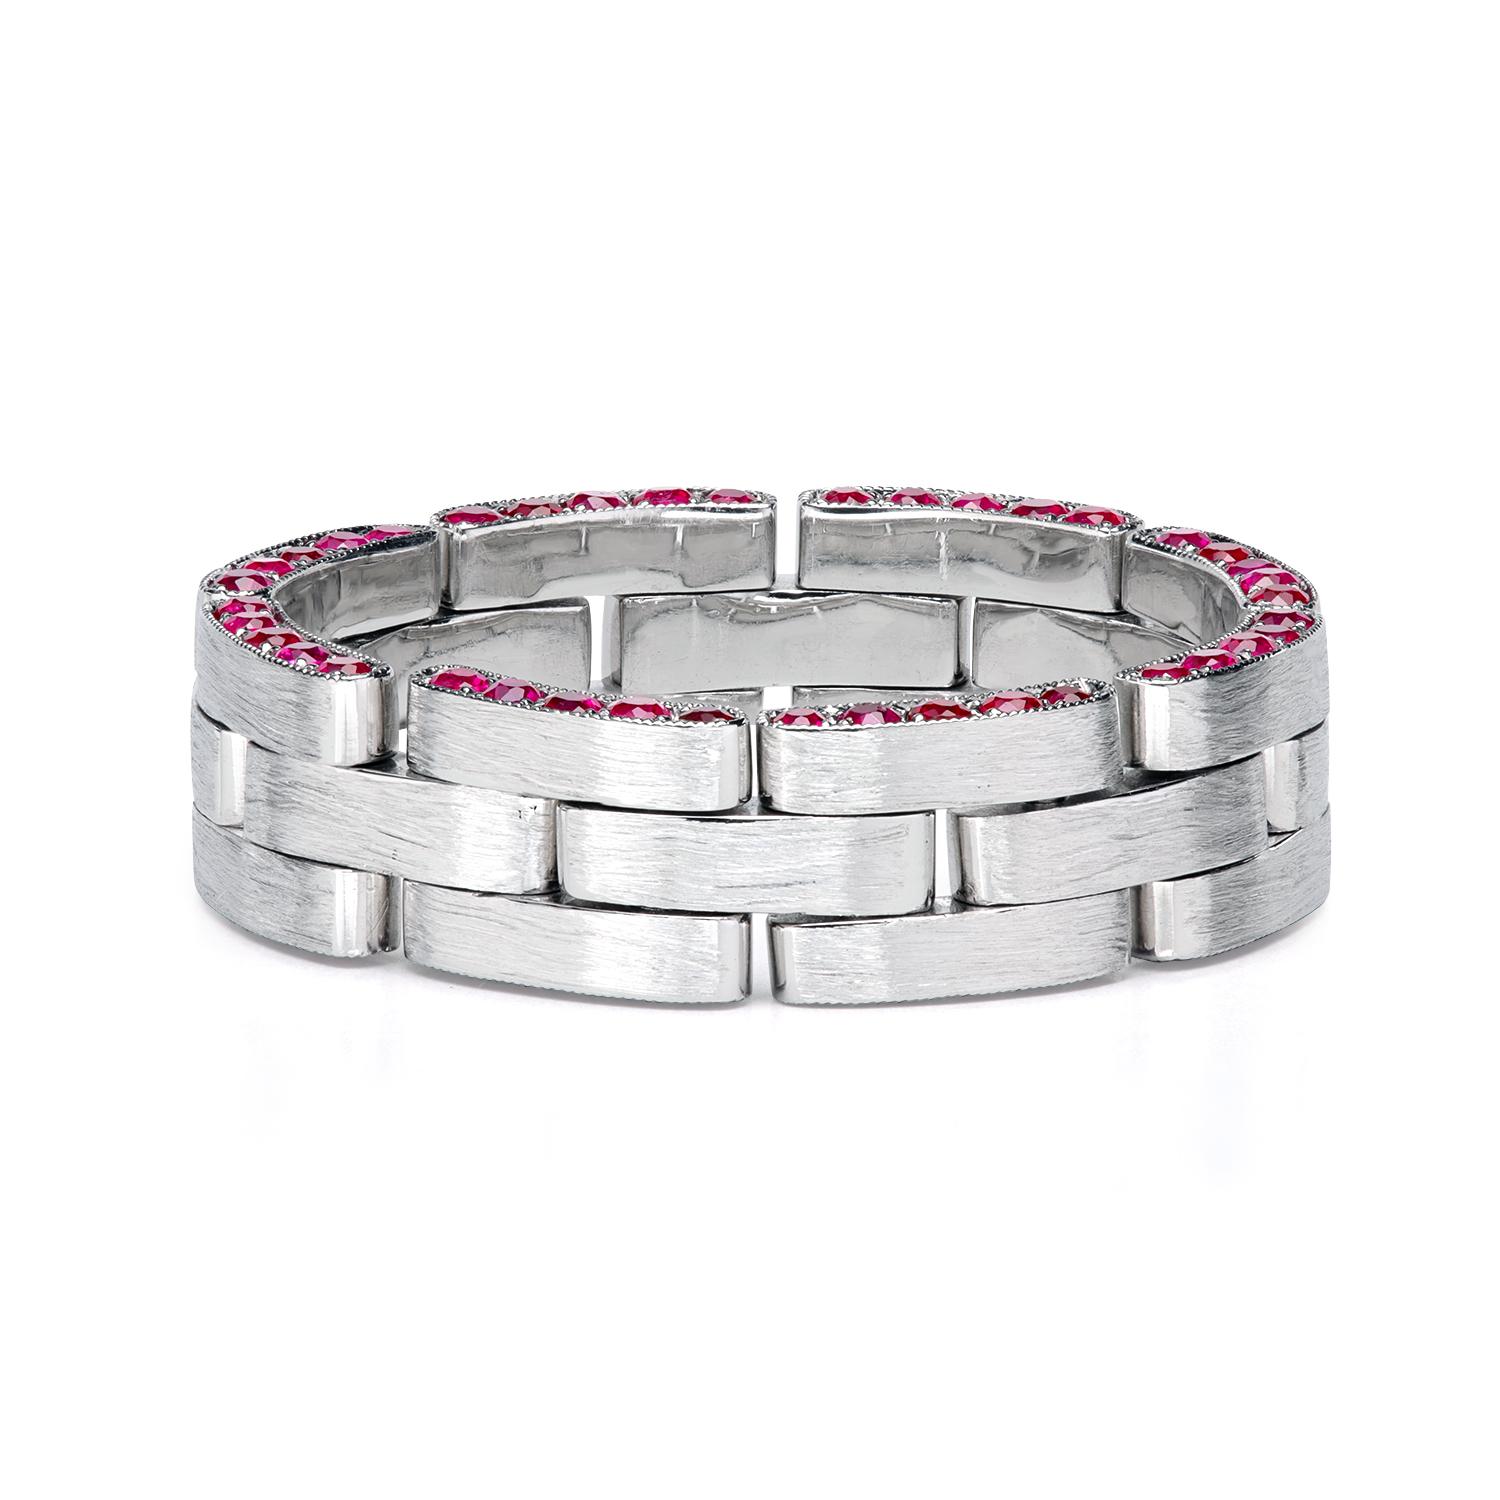 We infused the unisex wedding band with natural rubies on the sides of the wedding band. finger. The band is flexible and feels soft on a finger due to its hinged construction.
Width 6.8 mm
80 rubies 0.90 ctw
Finger size: 11
Rolex-grade